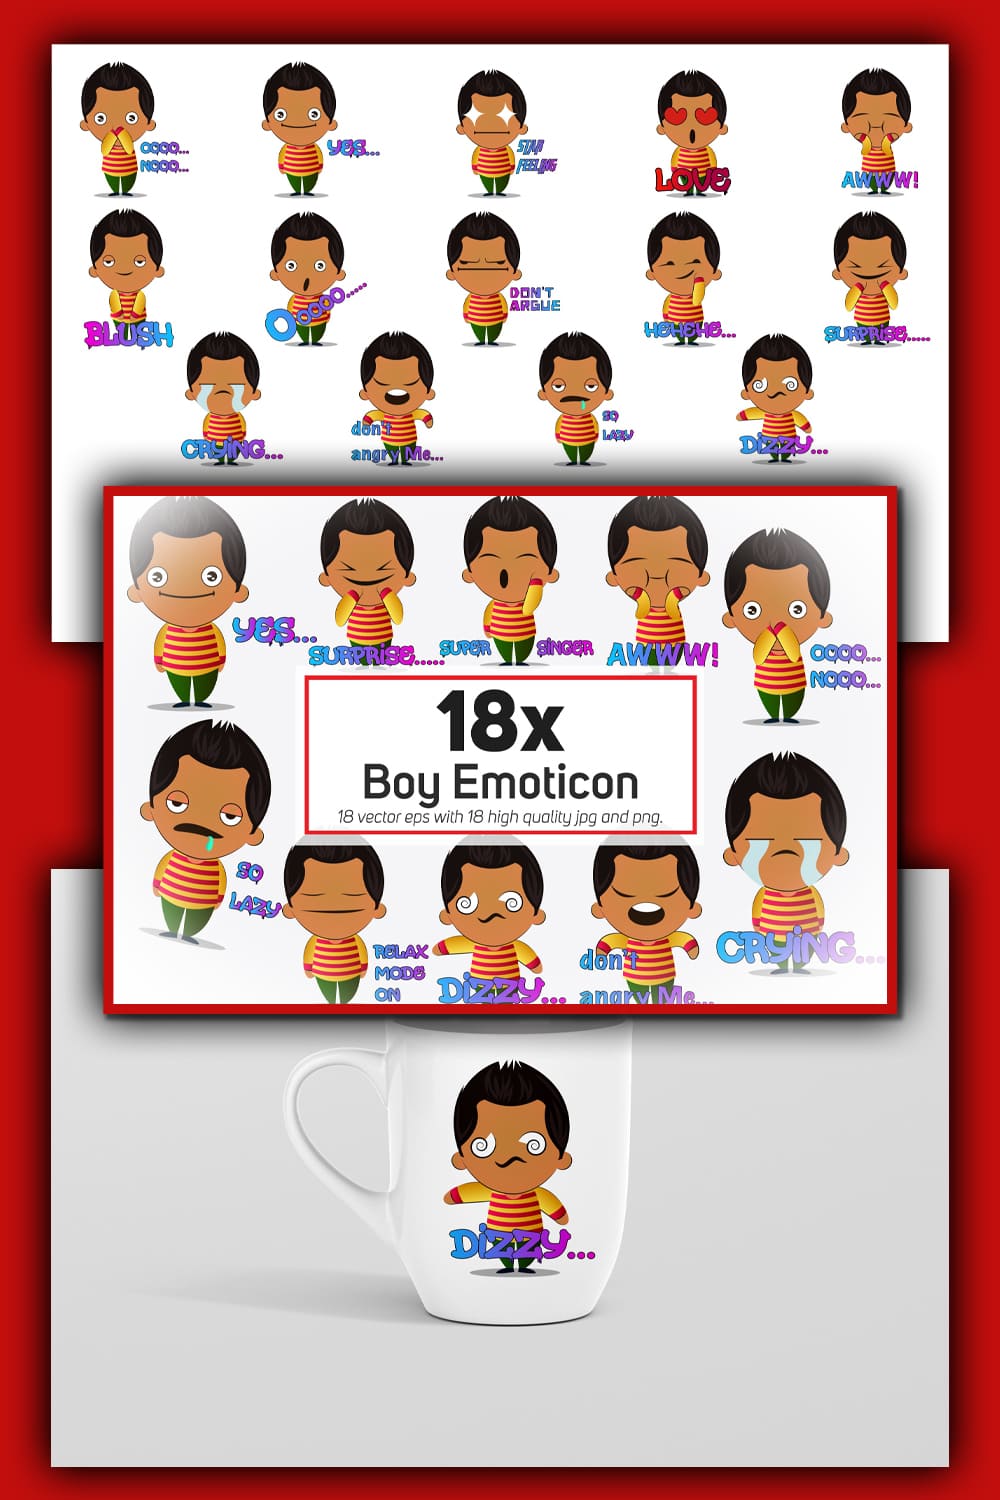 Boy emoticon or stickers character collection of pinterest.